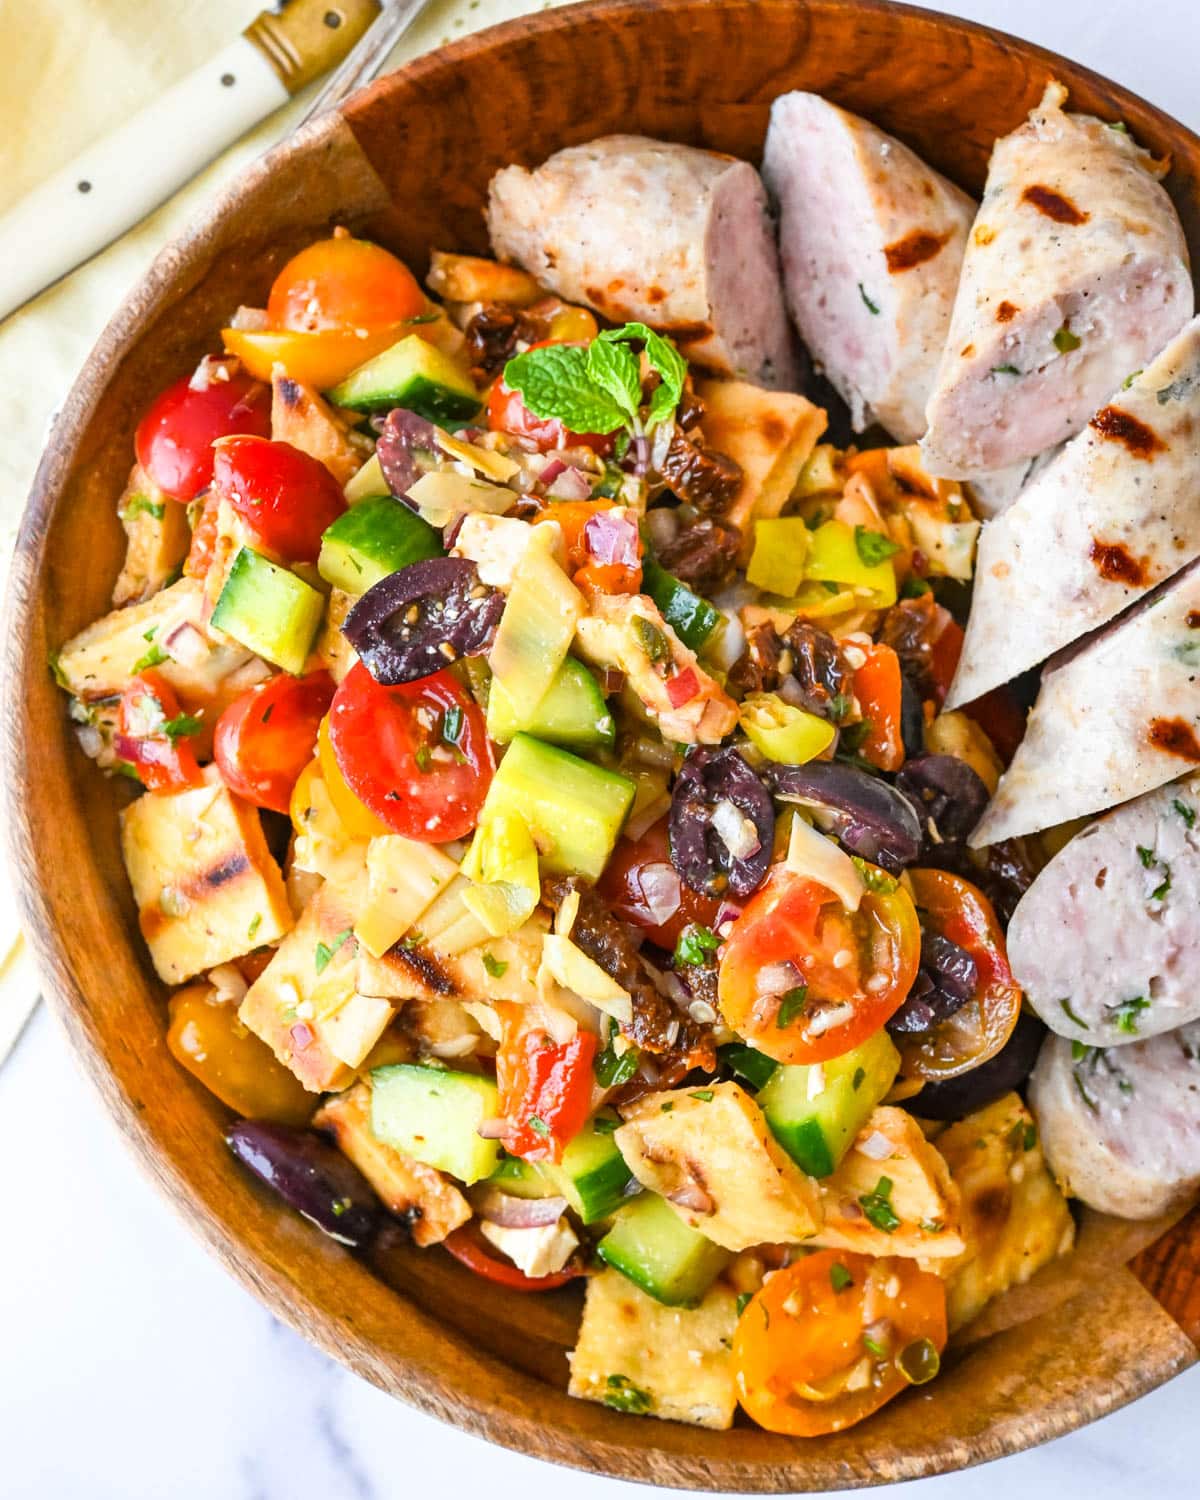 Serving grilled chicken sausage and panzanella salad in a wooden serving bowl.